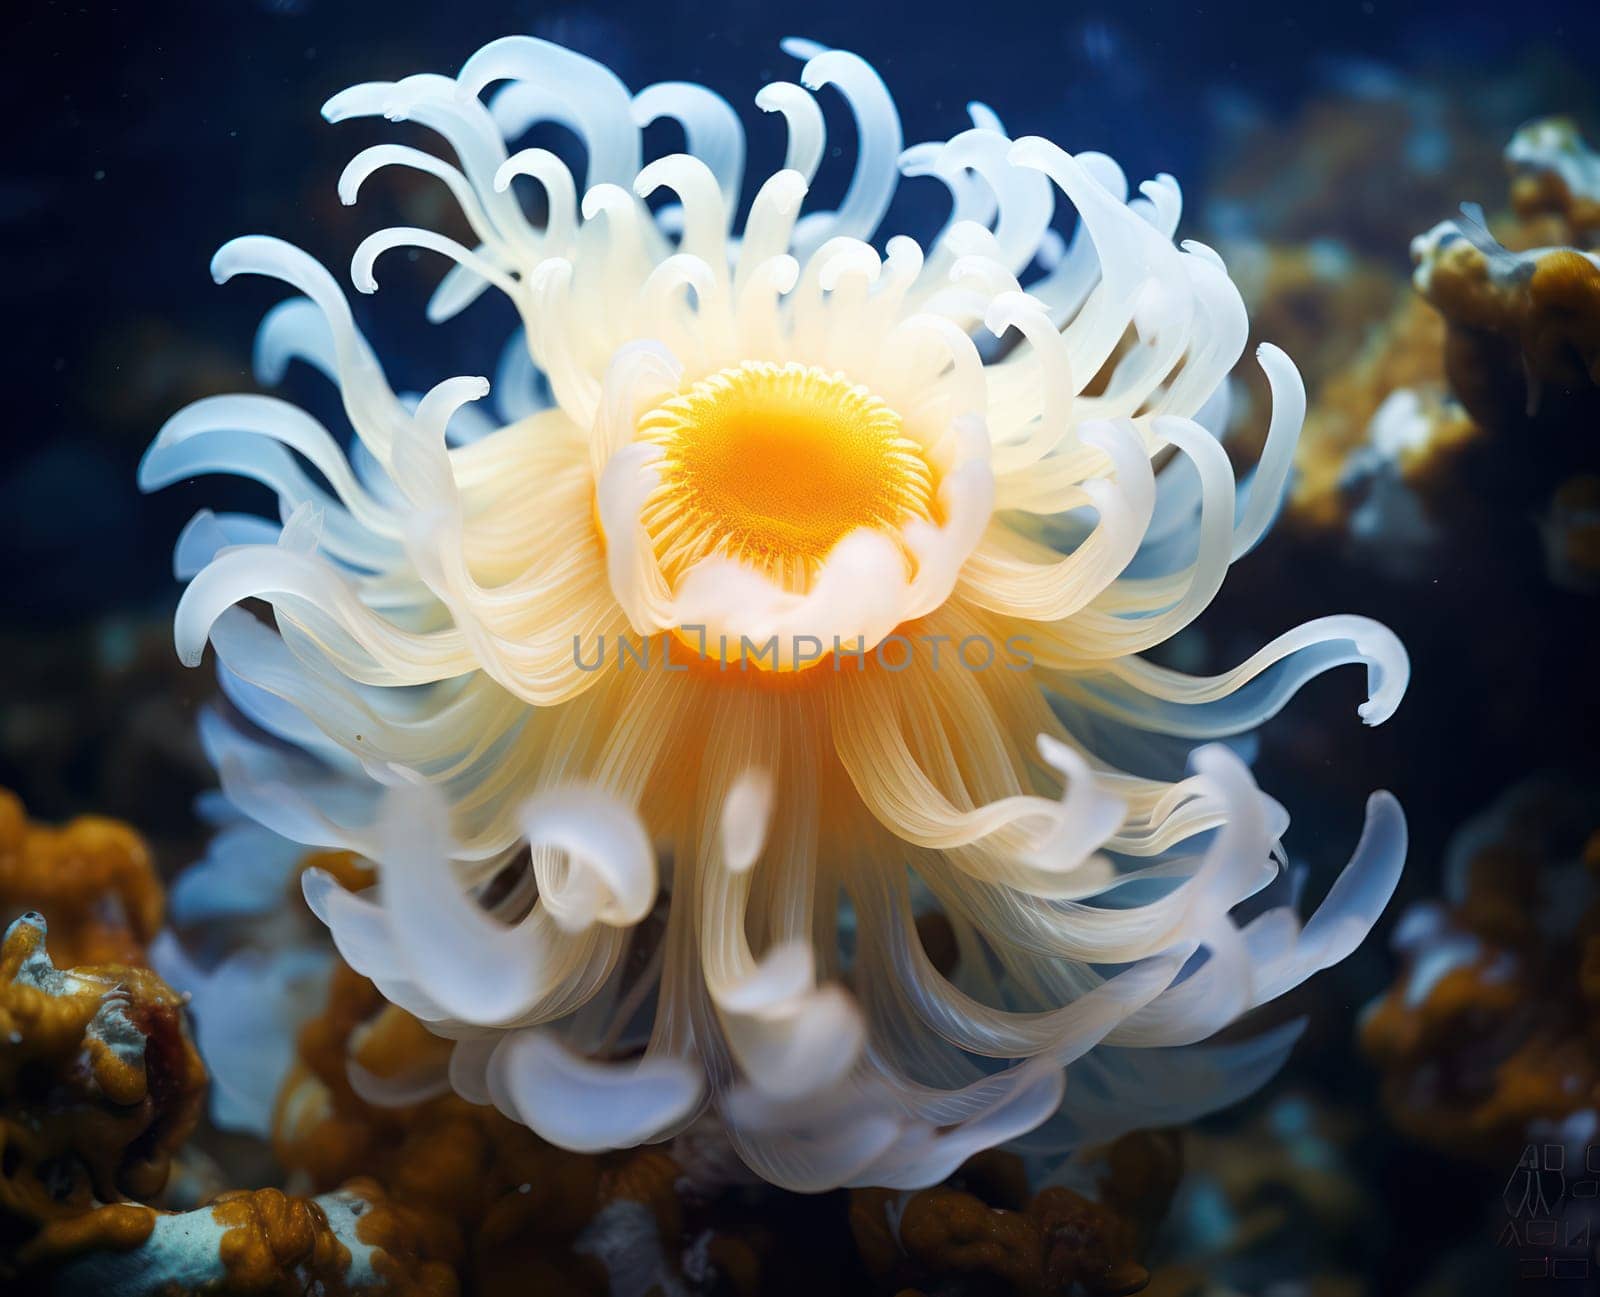 Colorful Underwater Wonderland: A Vibrant Mix of Marine Life, Coral and Anemone, Exotic Fish and Nudibranchs Dancing in a Spectacular Reef with Tentacles, in the Deep Blue Saltwater of the Pacific Ocean.